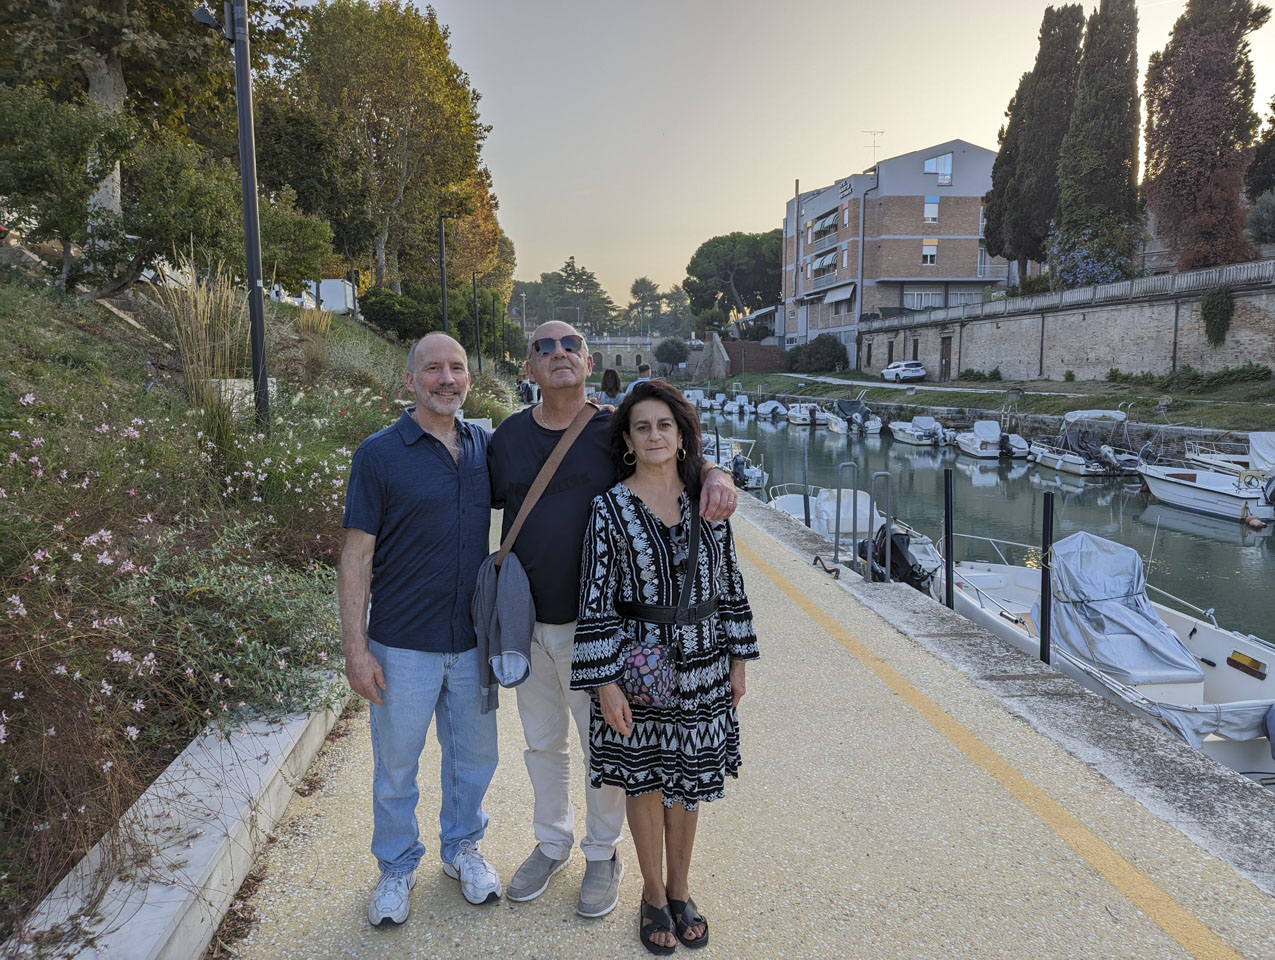 Paul, Francesco, and Doni standing next to the canal